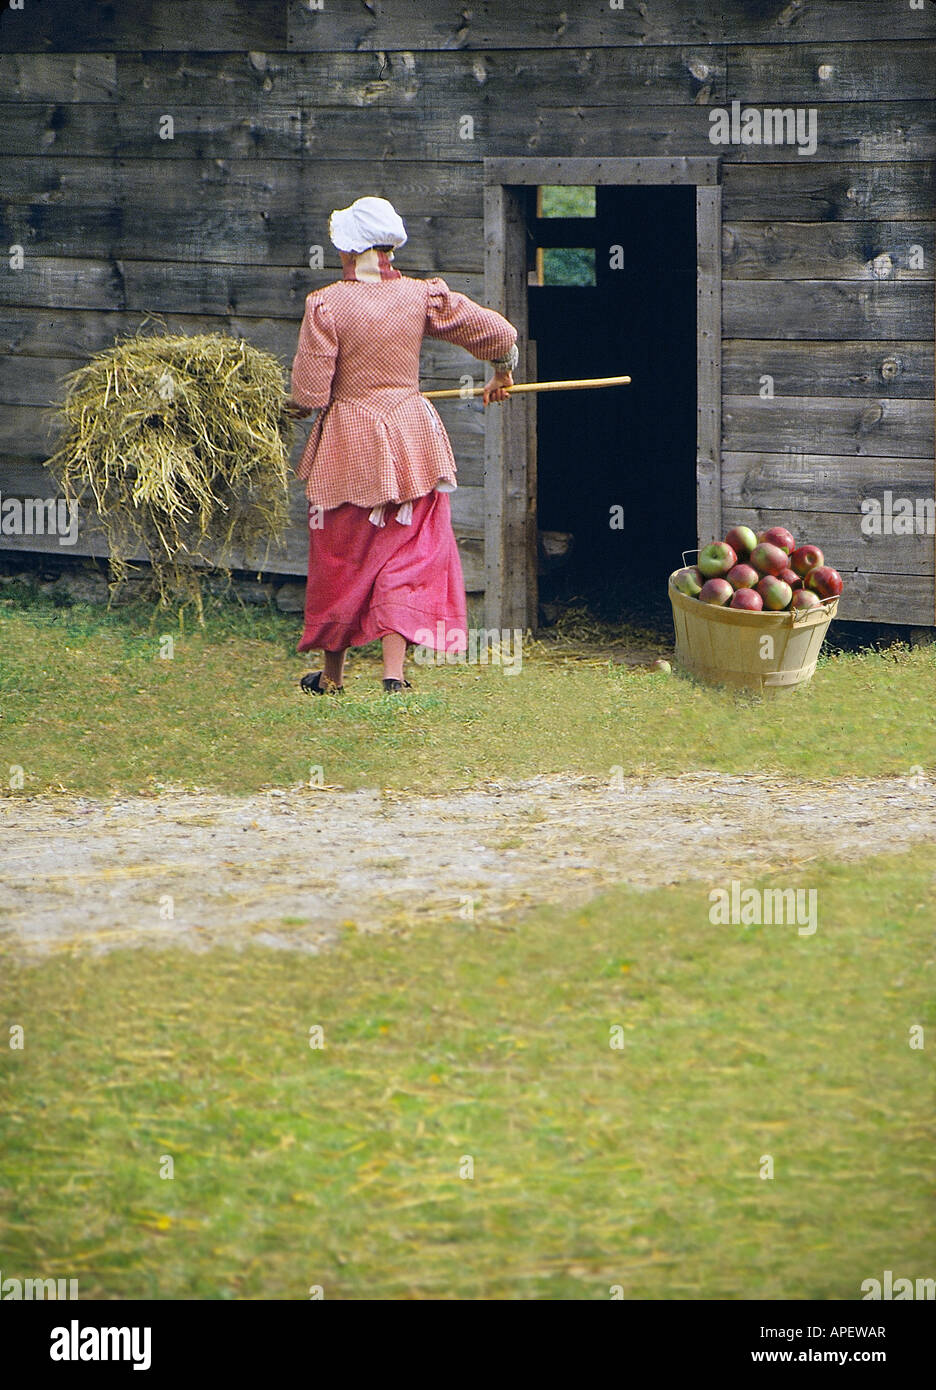 Young woman walking away, dressed in Colonial times farm dress, with pitchfork and hay, by old barn with basket of red apples. Stock Photo